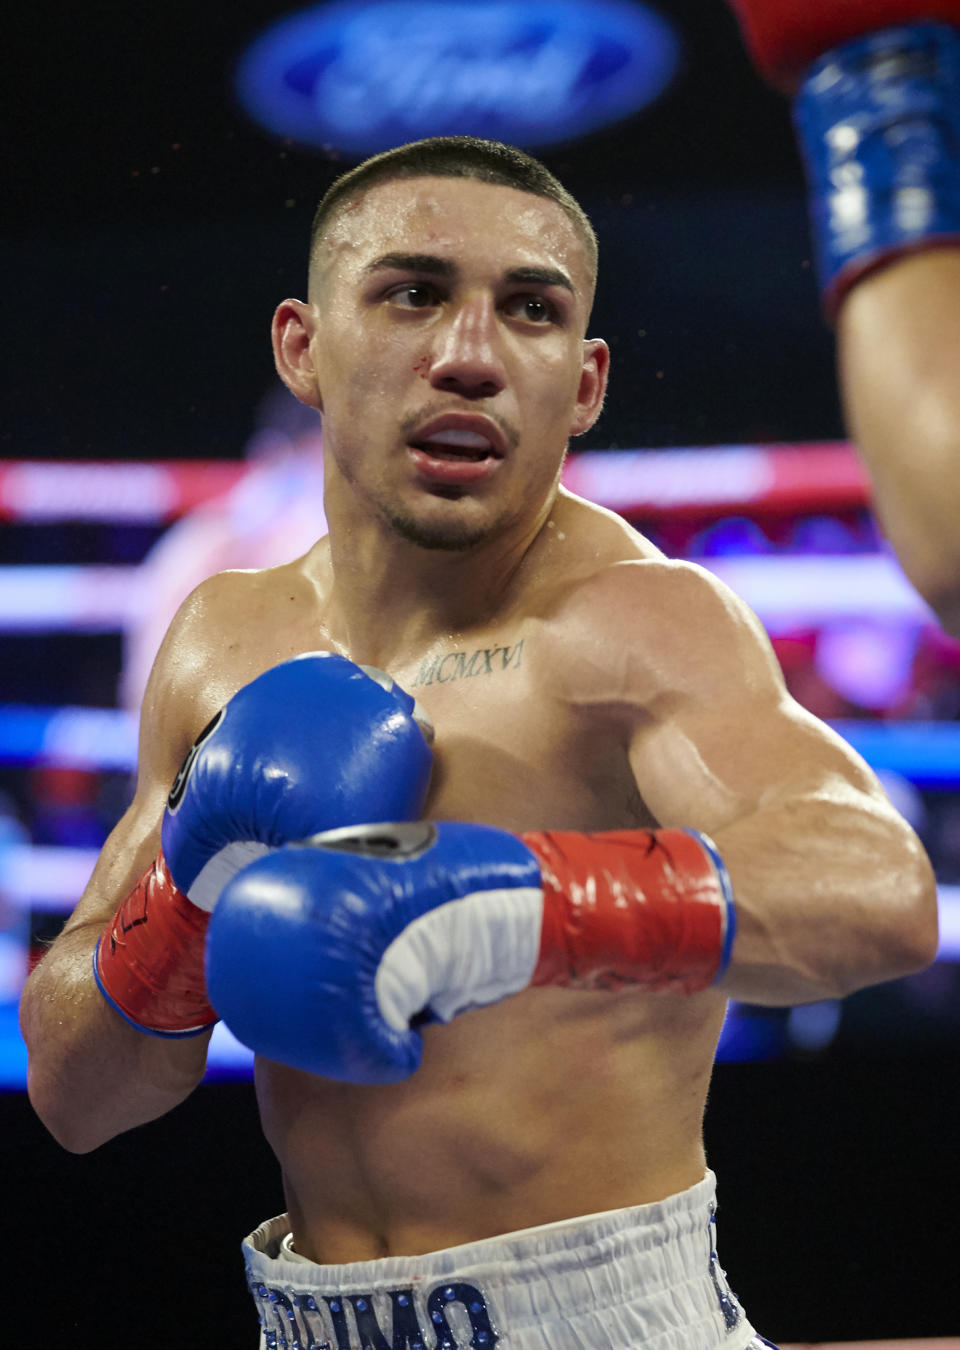 FILE - In this Feb. 2, 2019, file photo, Teofimo Lopez is shown during his lightweight boxing match against Diego Magdaleno, in Frisco, Texas. Brooklyn-born Teofimo Lopez stunned Vasiliy Lomachenko on Saturday, Oct. 17, 2020, to win a unanimous 12-round decision and unify the lightweight titles to join a rare group of boxers of Central American descent to capture a world championship. (AP Photo/Cooper Neill, File)